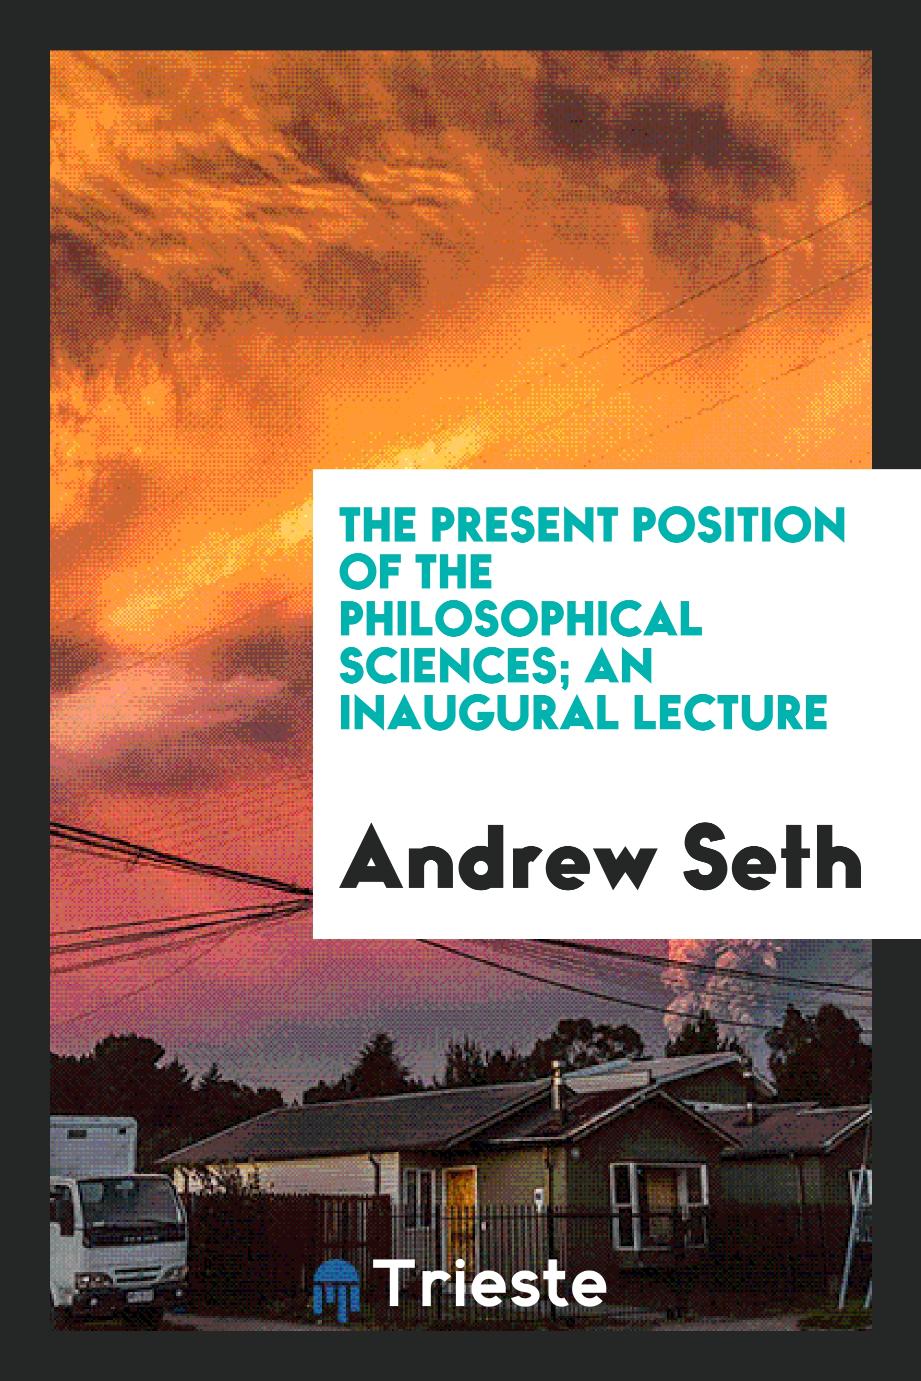 The present position of the philosophical sciences; an inaugural lecture